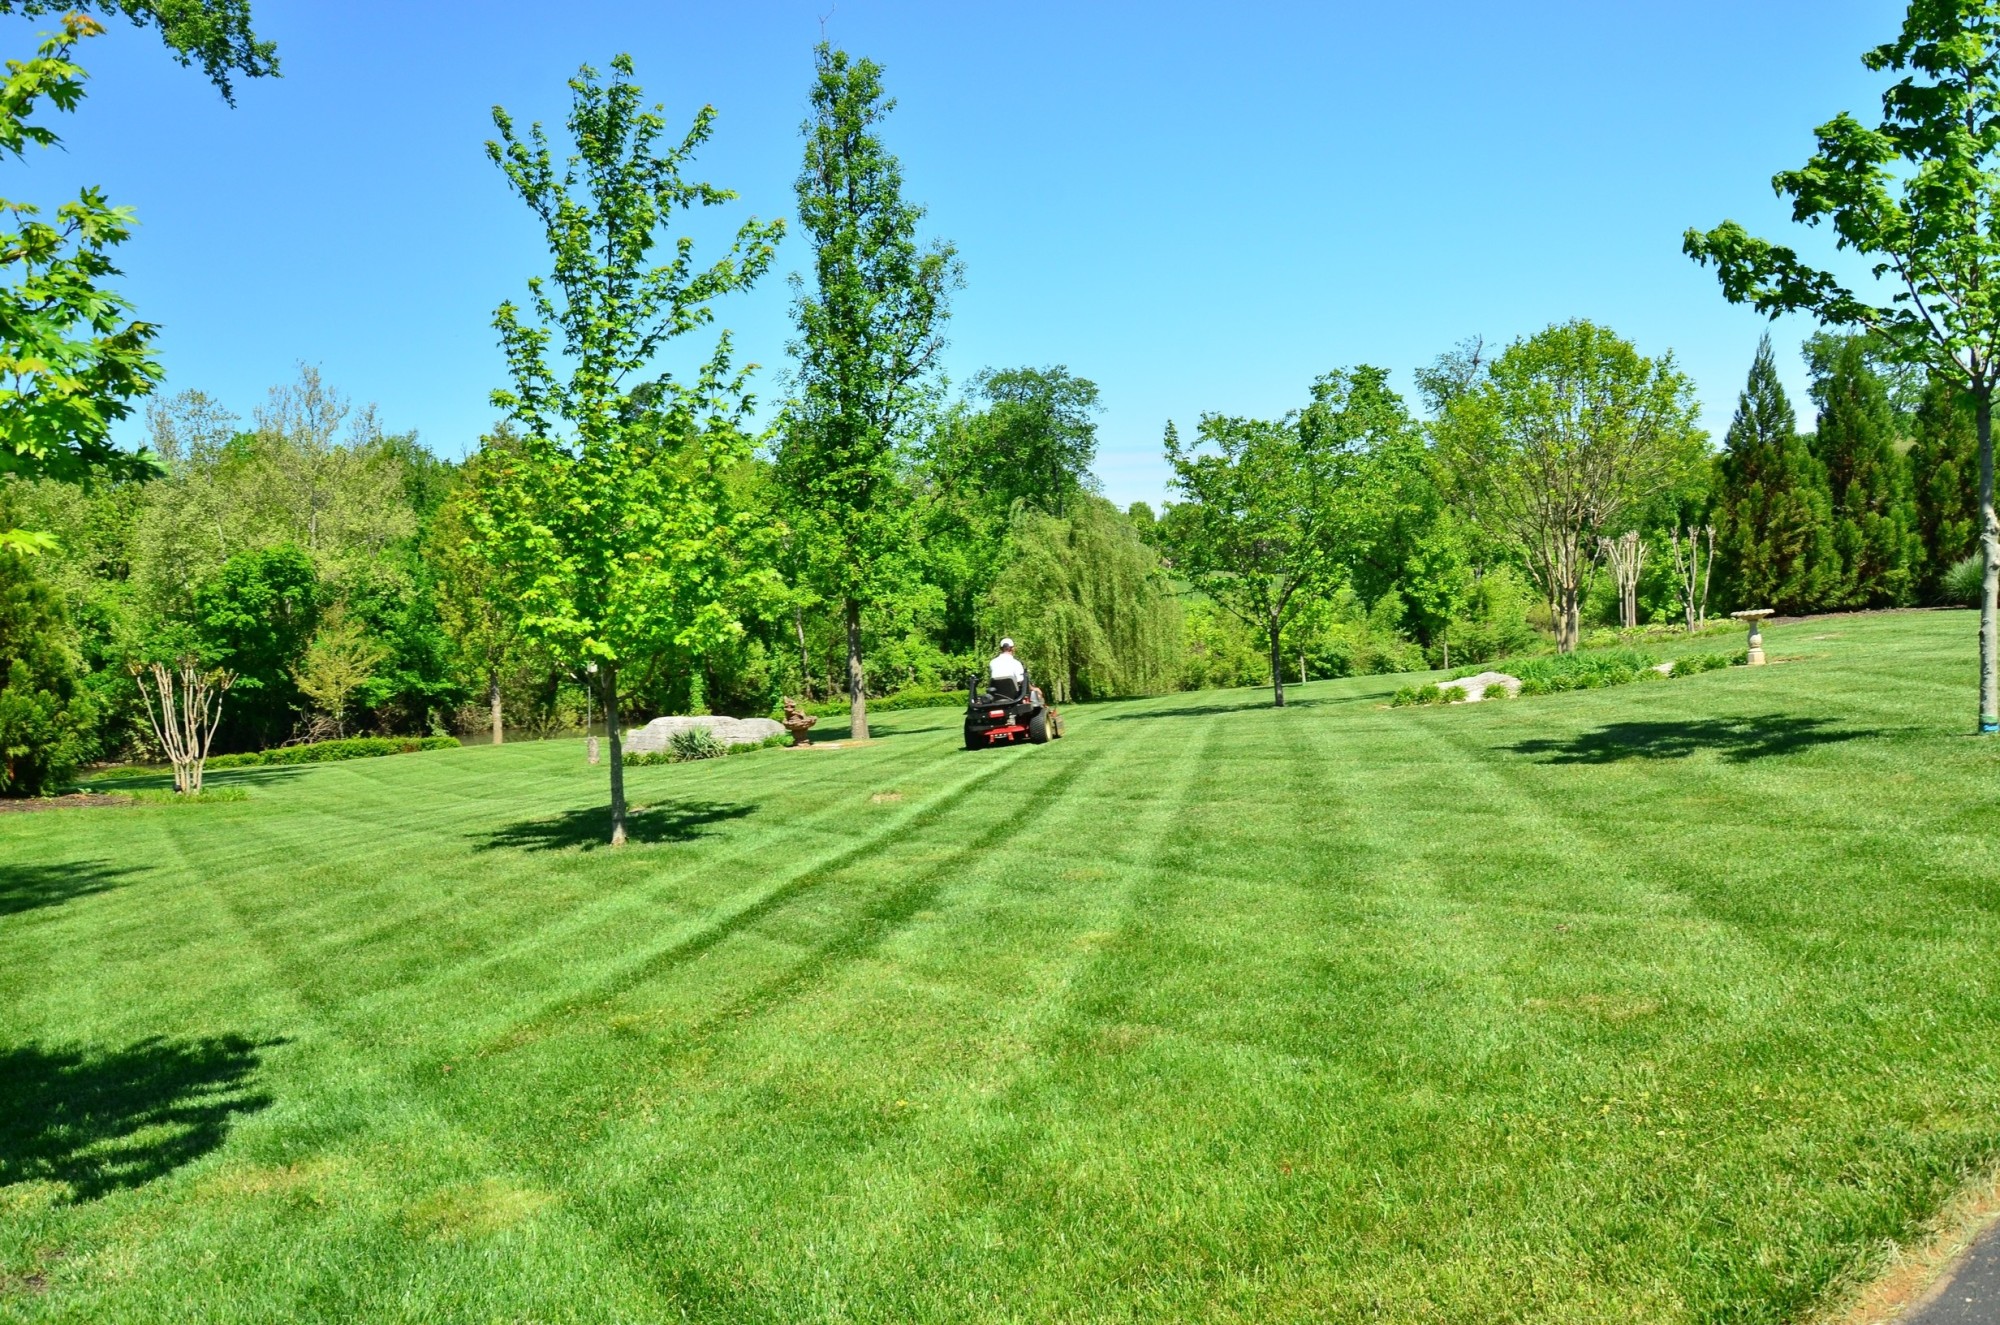 Summer Lawn Care Tips: The Best Lawn Watering Schedule for Summer